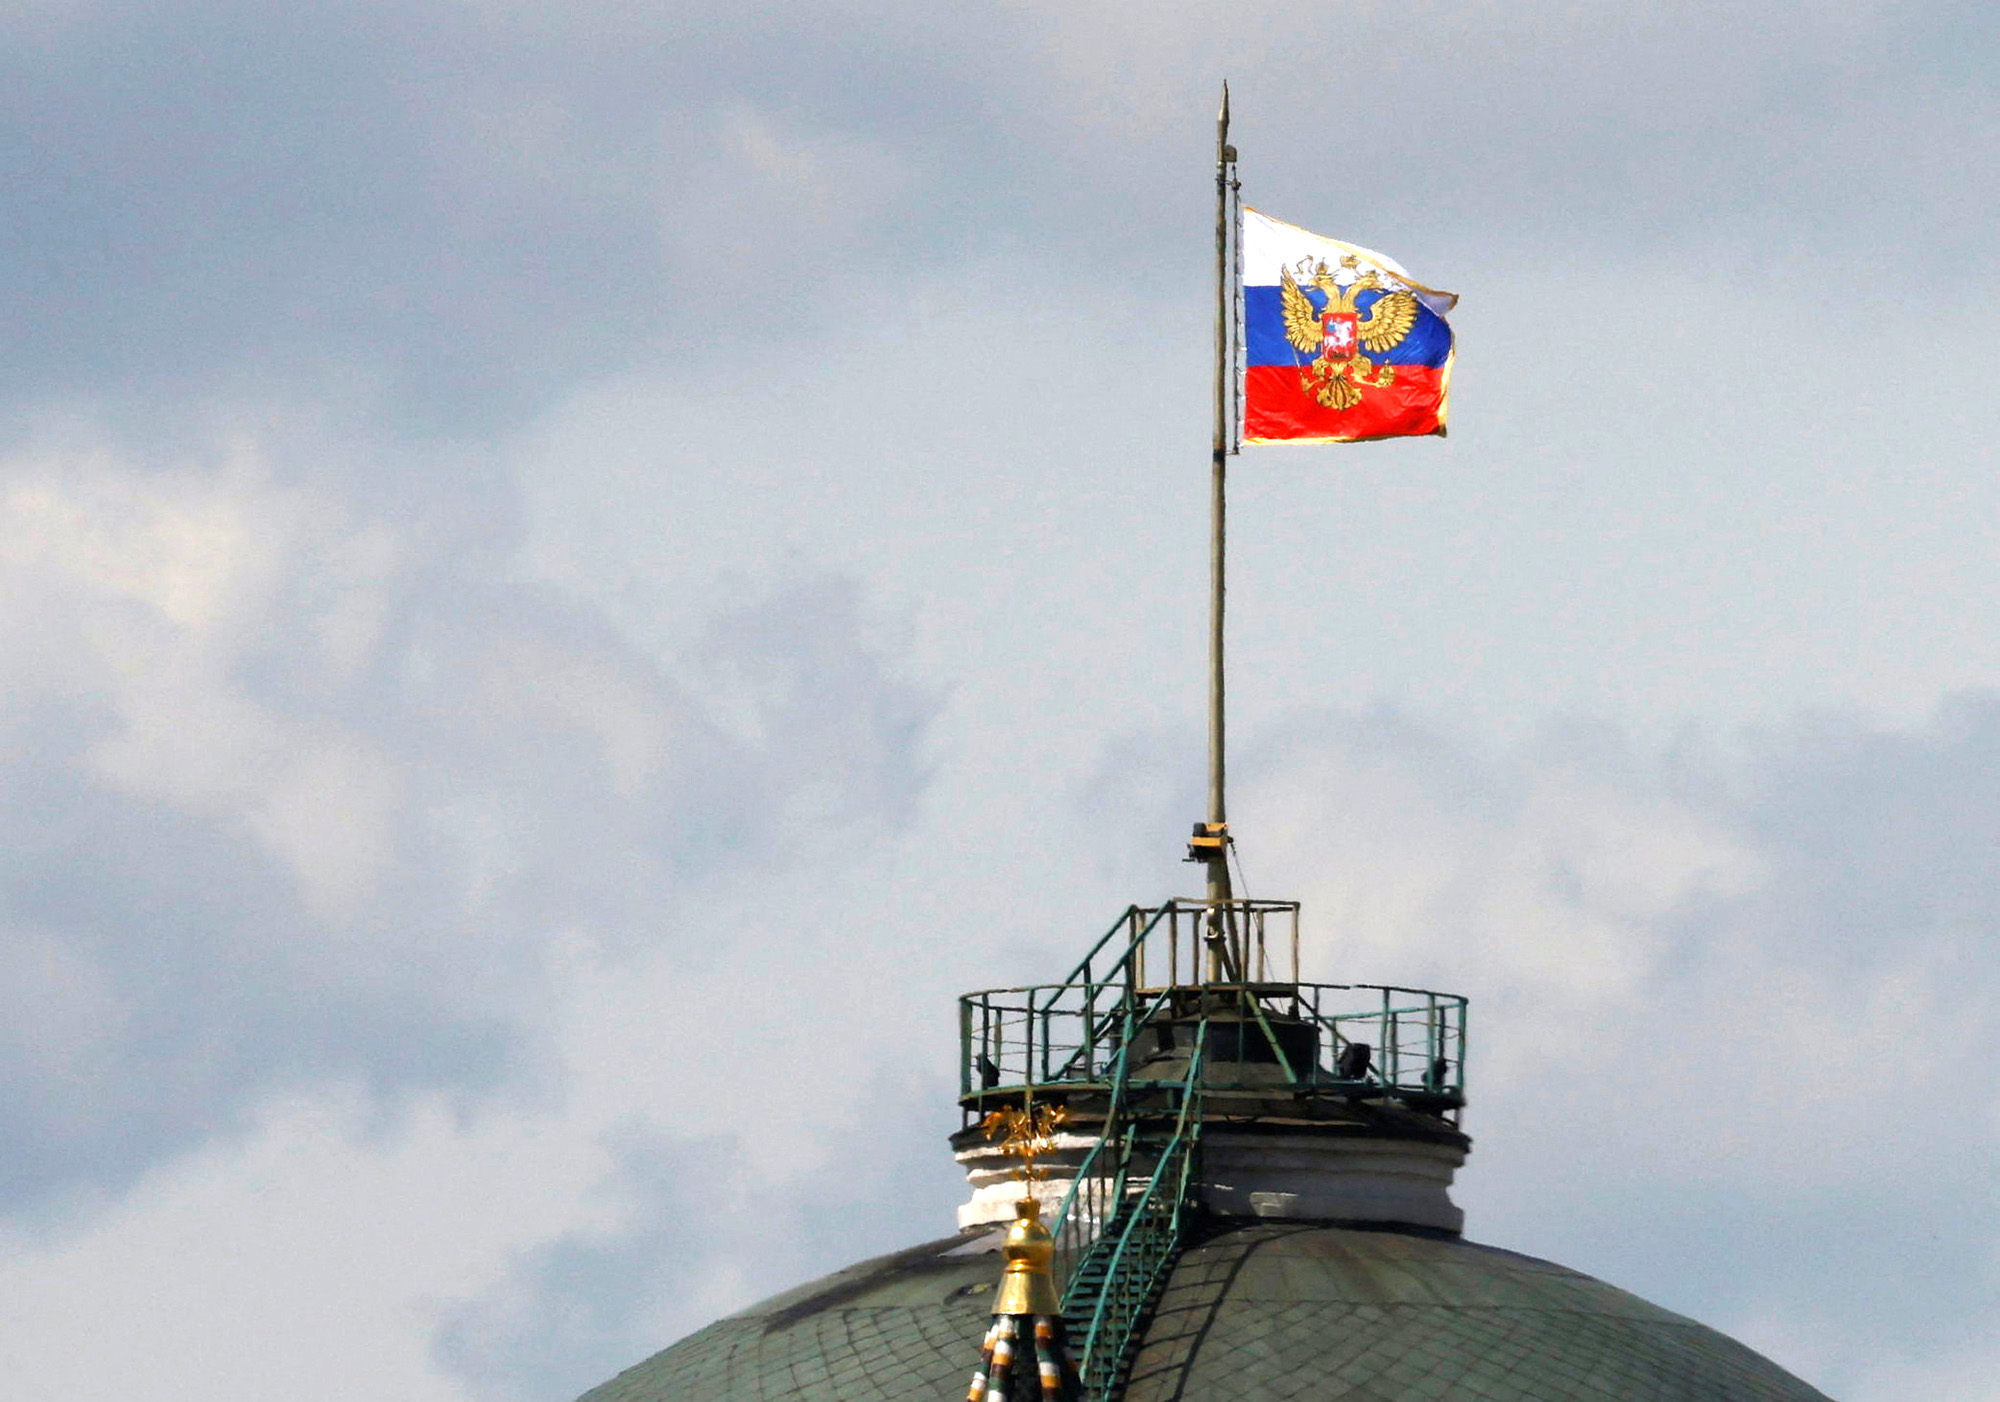 The Russian flag flies on the dome of the Kremlin Senate building, while the roof shows what appears to be marks from the recent drone incident, in central Moscow, Russia, on May 4.